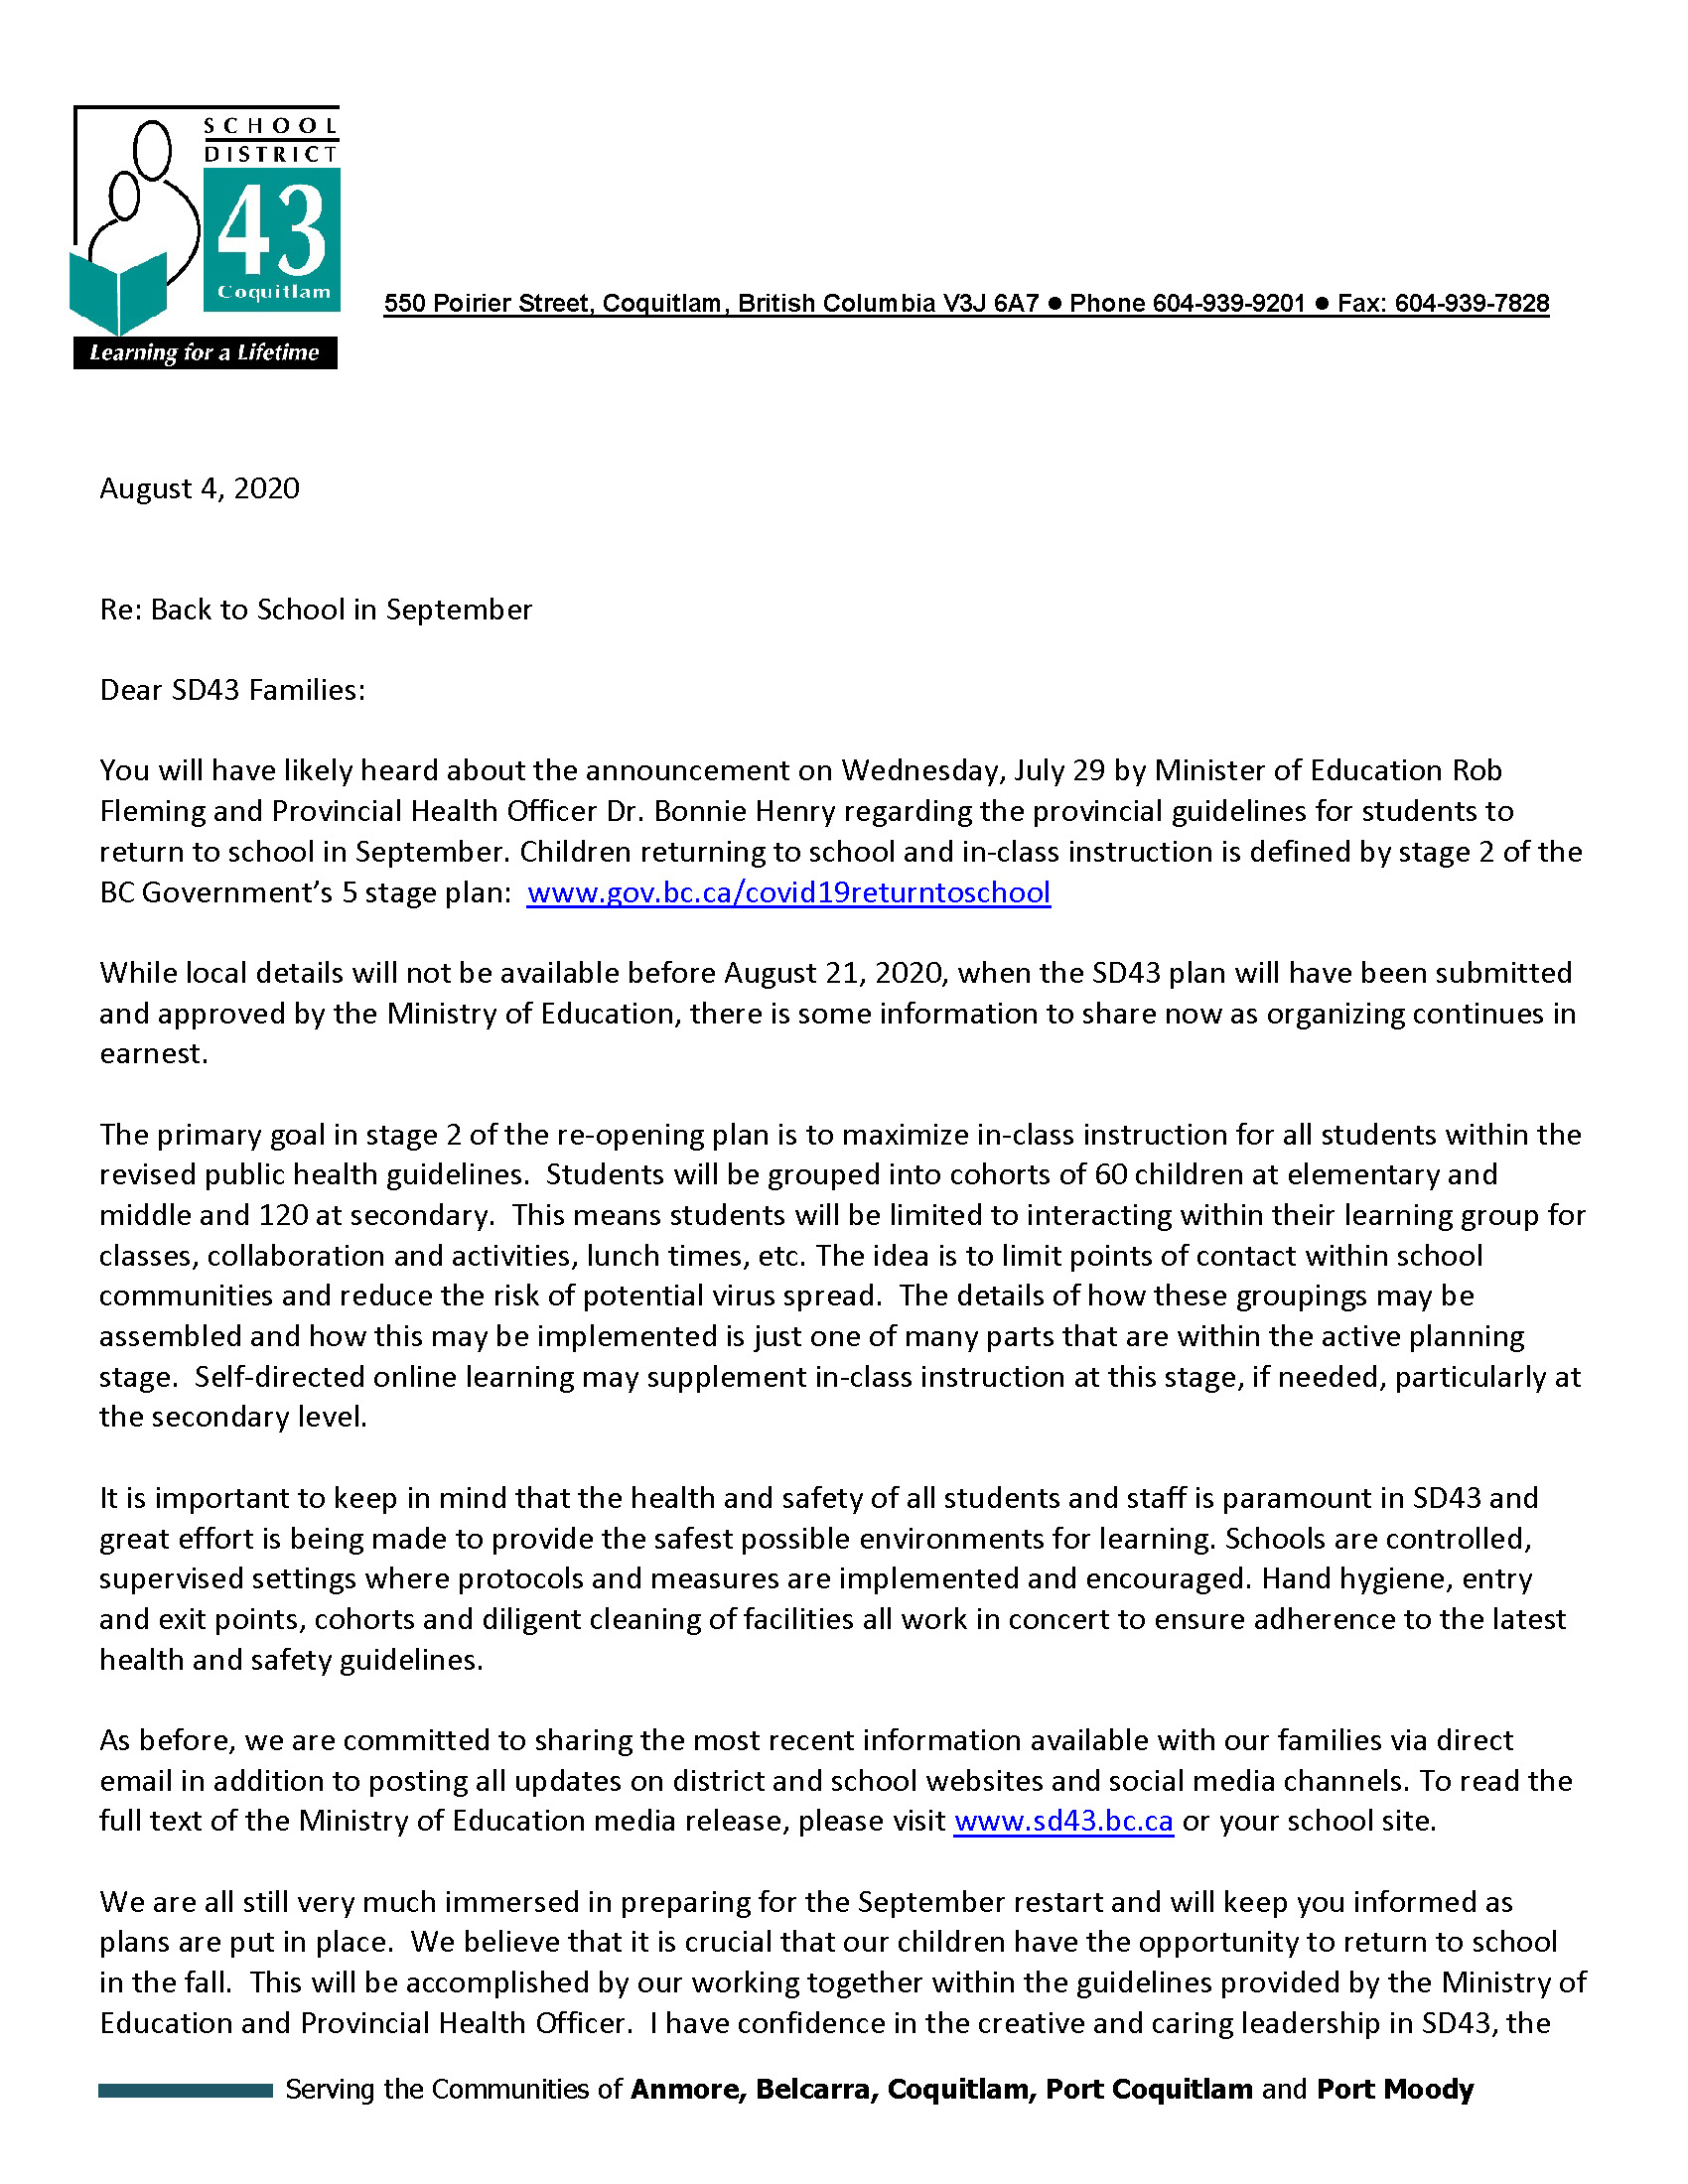 Superintendent Letter to Parents re September Opening Aug 4 2020_Page_1.jpg